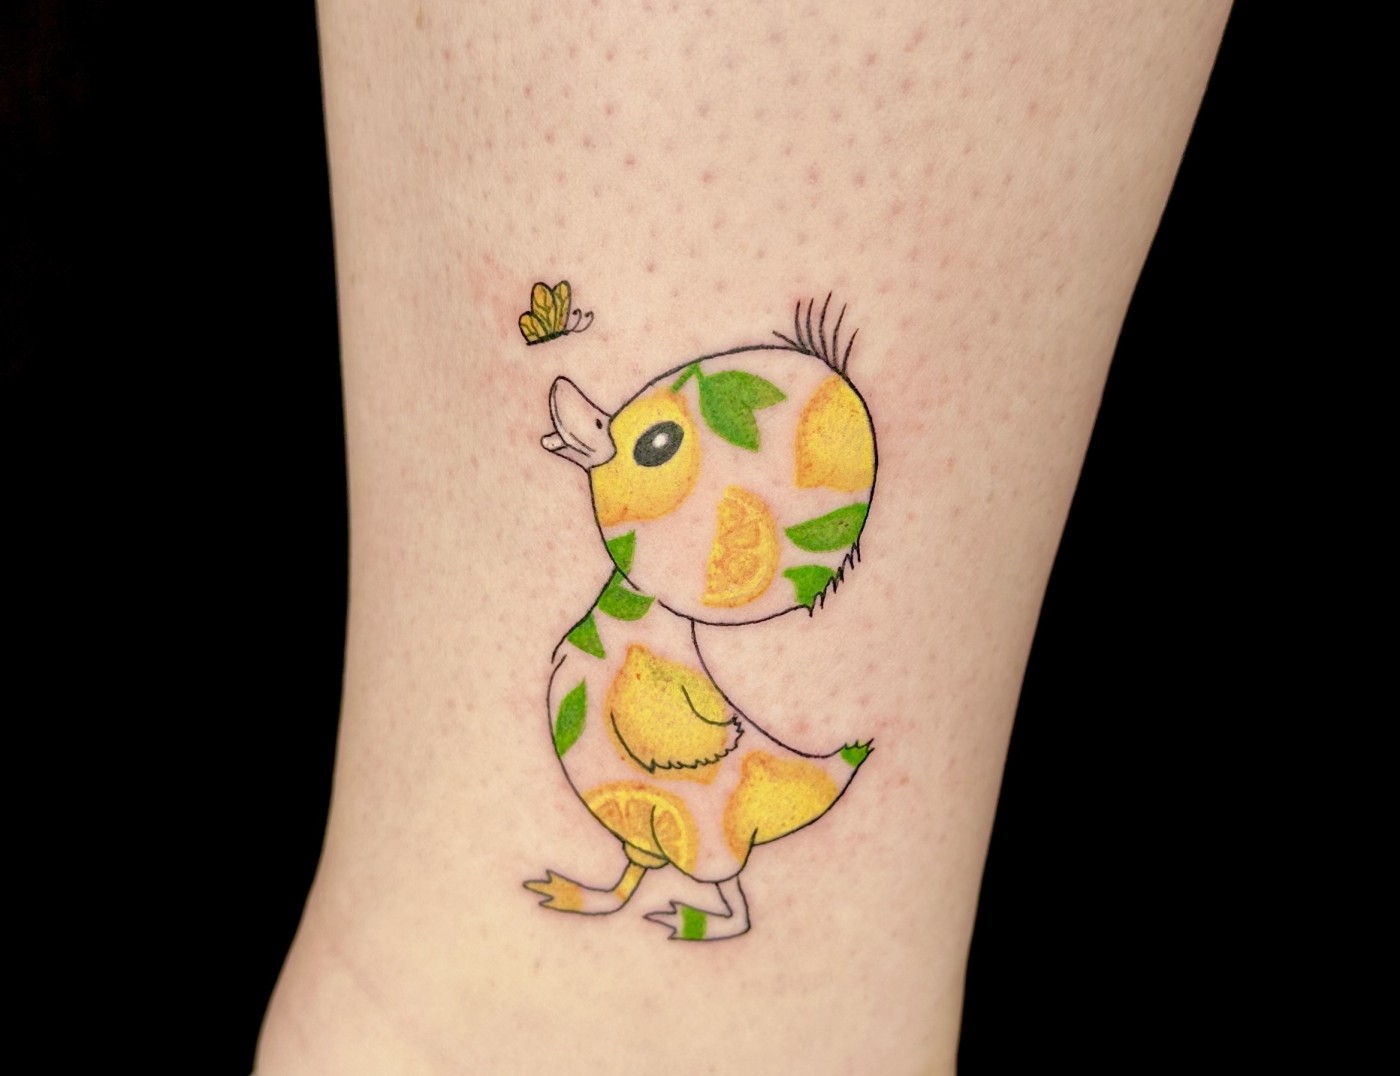 Duckling & Butterfly with Lemon Color Tattoo By Morana, a guest tattoo artist at Iron Palm Tattoos in Atlanta. Morana comes to us from Iron & Ink Tattoo Studio in Los Angeles and will be available for booking Sept 23 - 27th. We're open late night until 2AM most nights. Call 404-973-7828 or stop by for a free consultation.